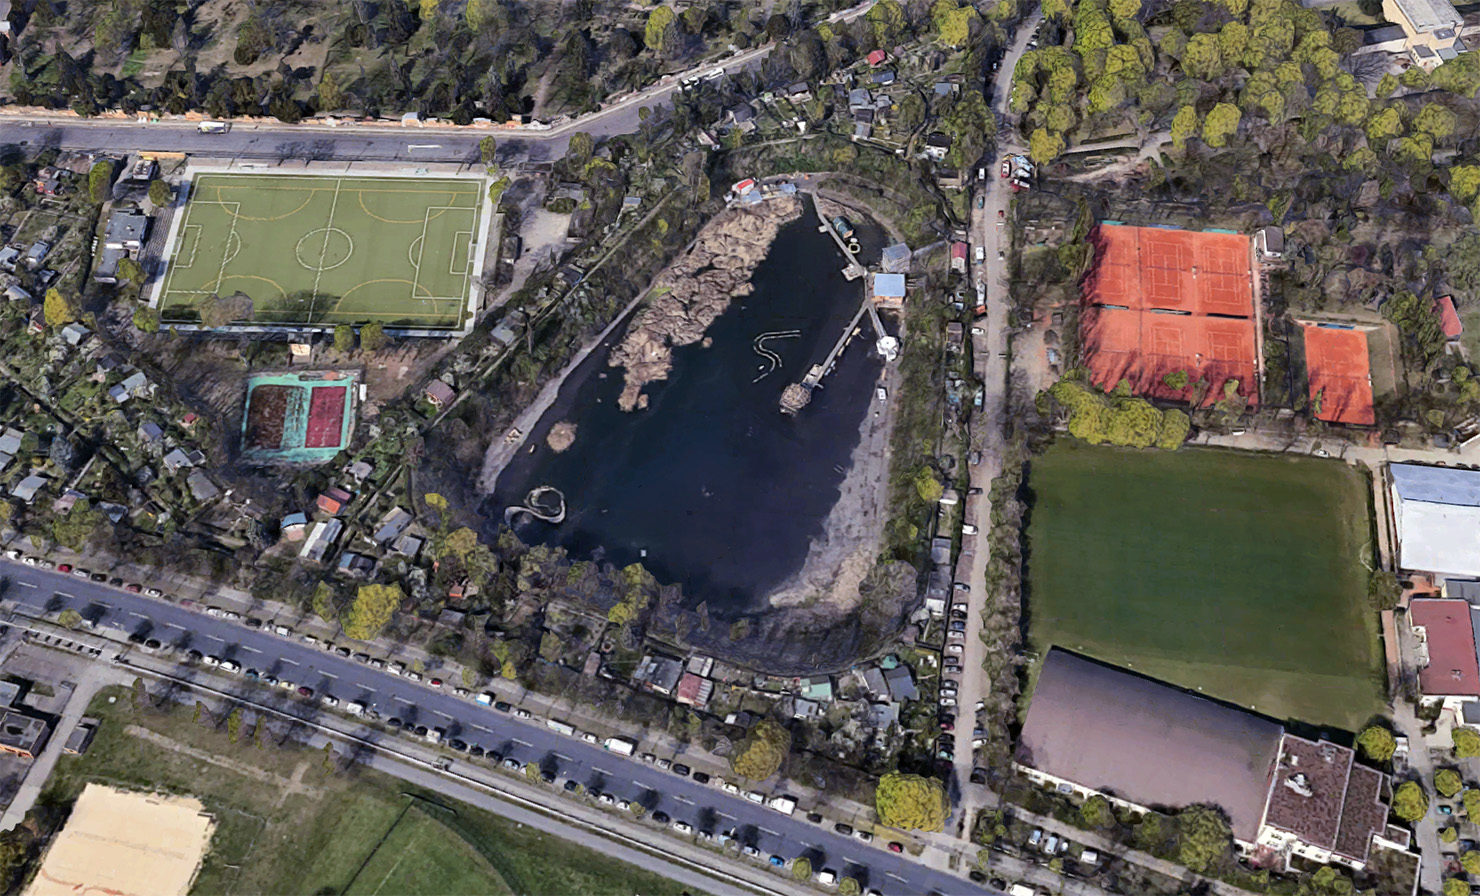 An aerial view of the Floating University, showing water collected in the basin.